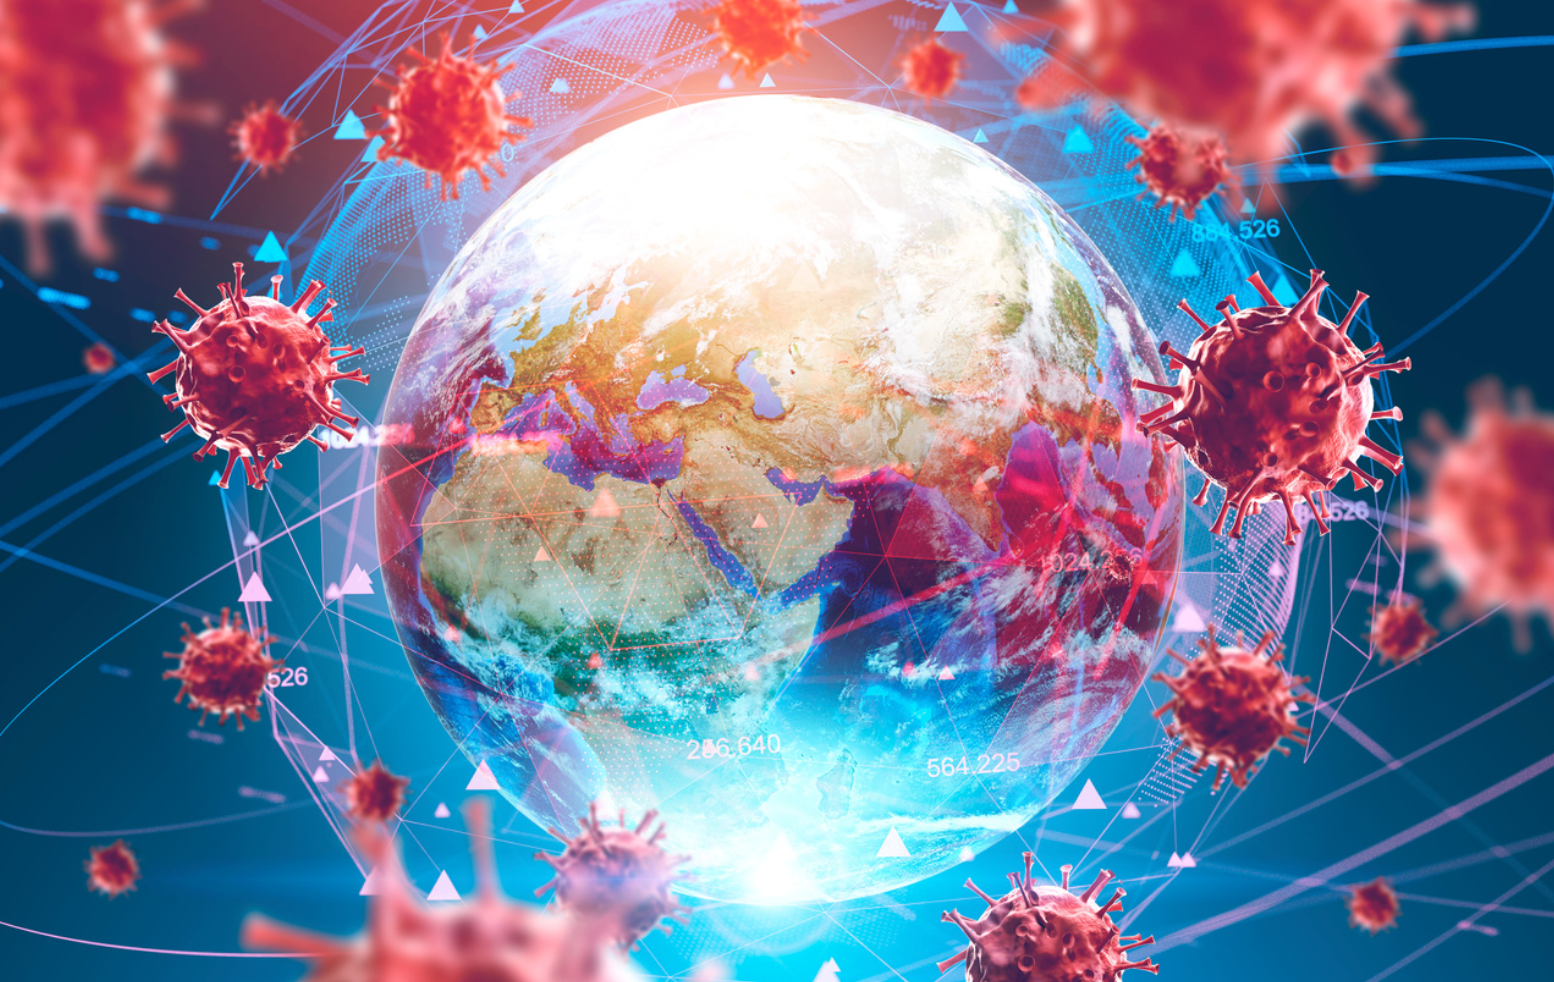 COVID-19 Breakthrough Infections More Common, More Severe Among Immunocompromised Individuals